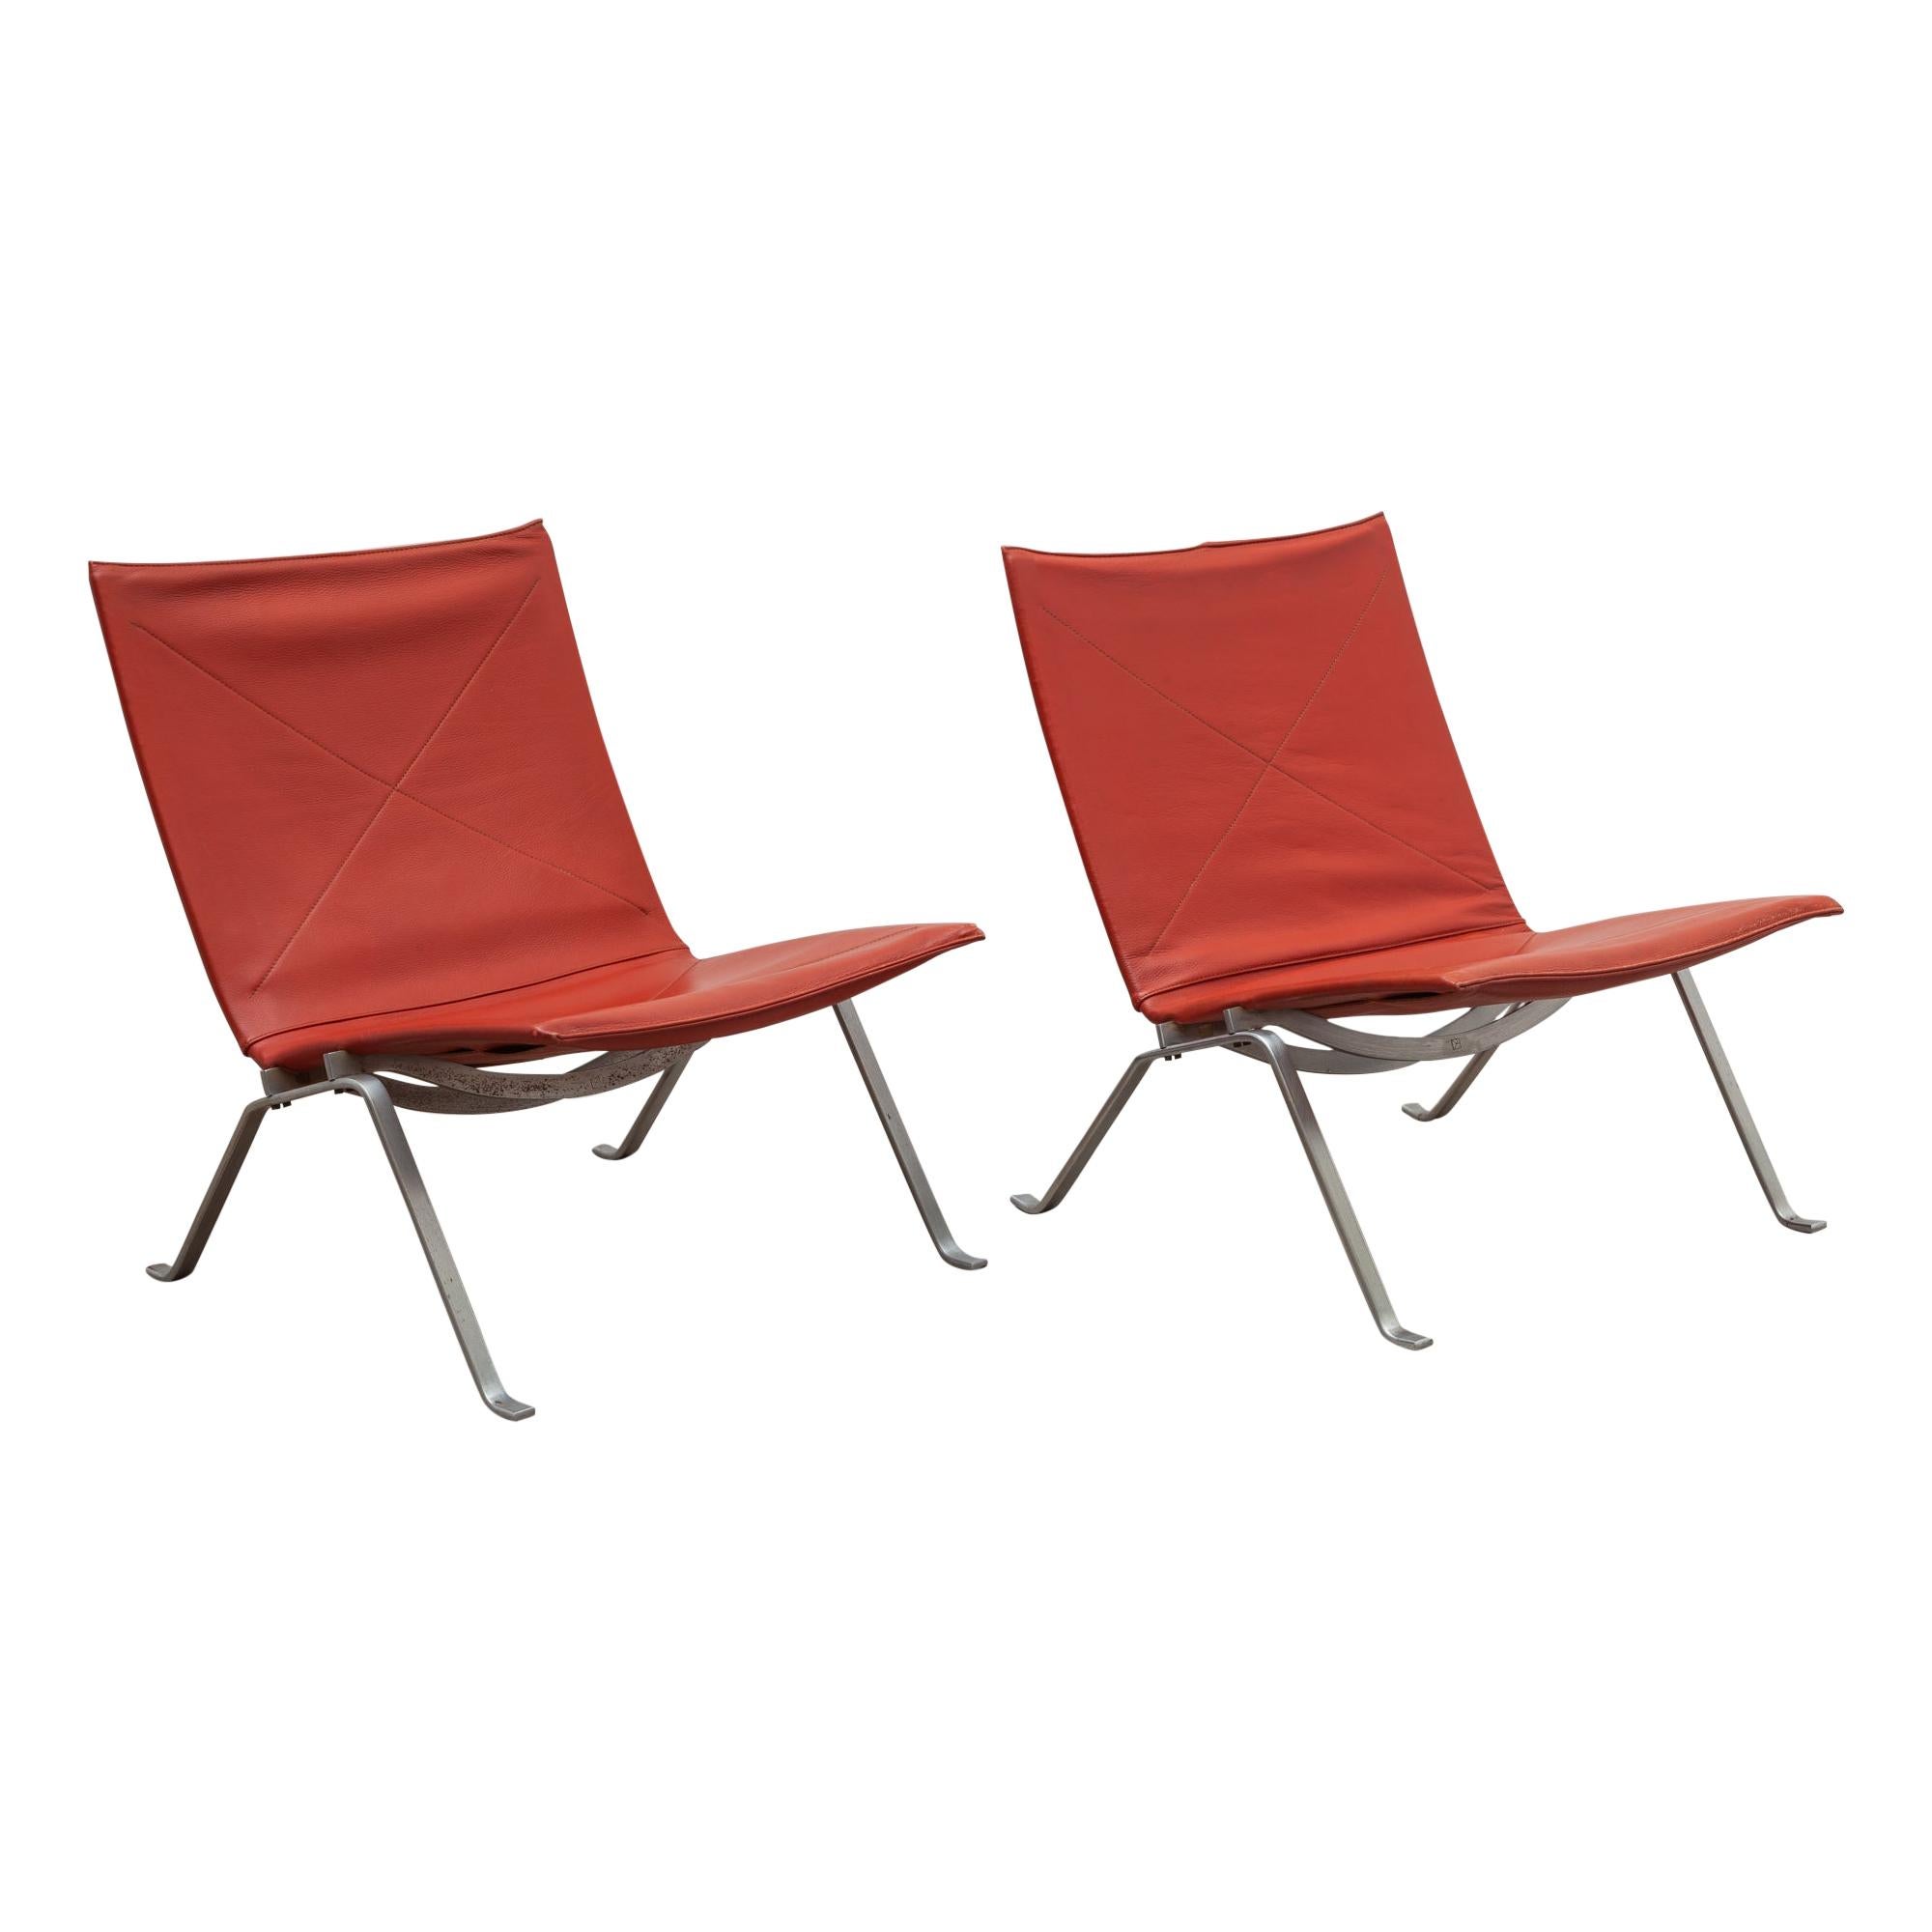 Pair of PK 22 Lounge Chairs by Poul Kjearholm, Denmark, Oxblood Leather For Sale